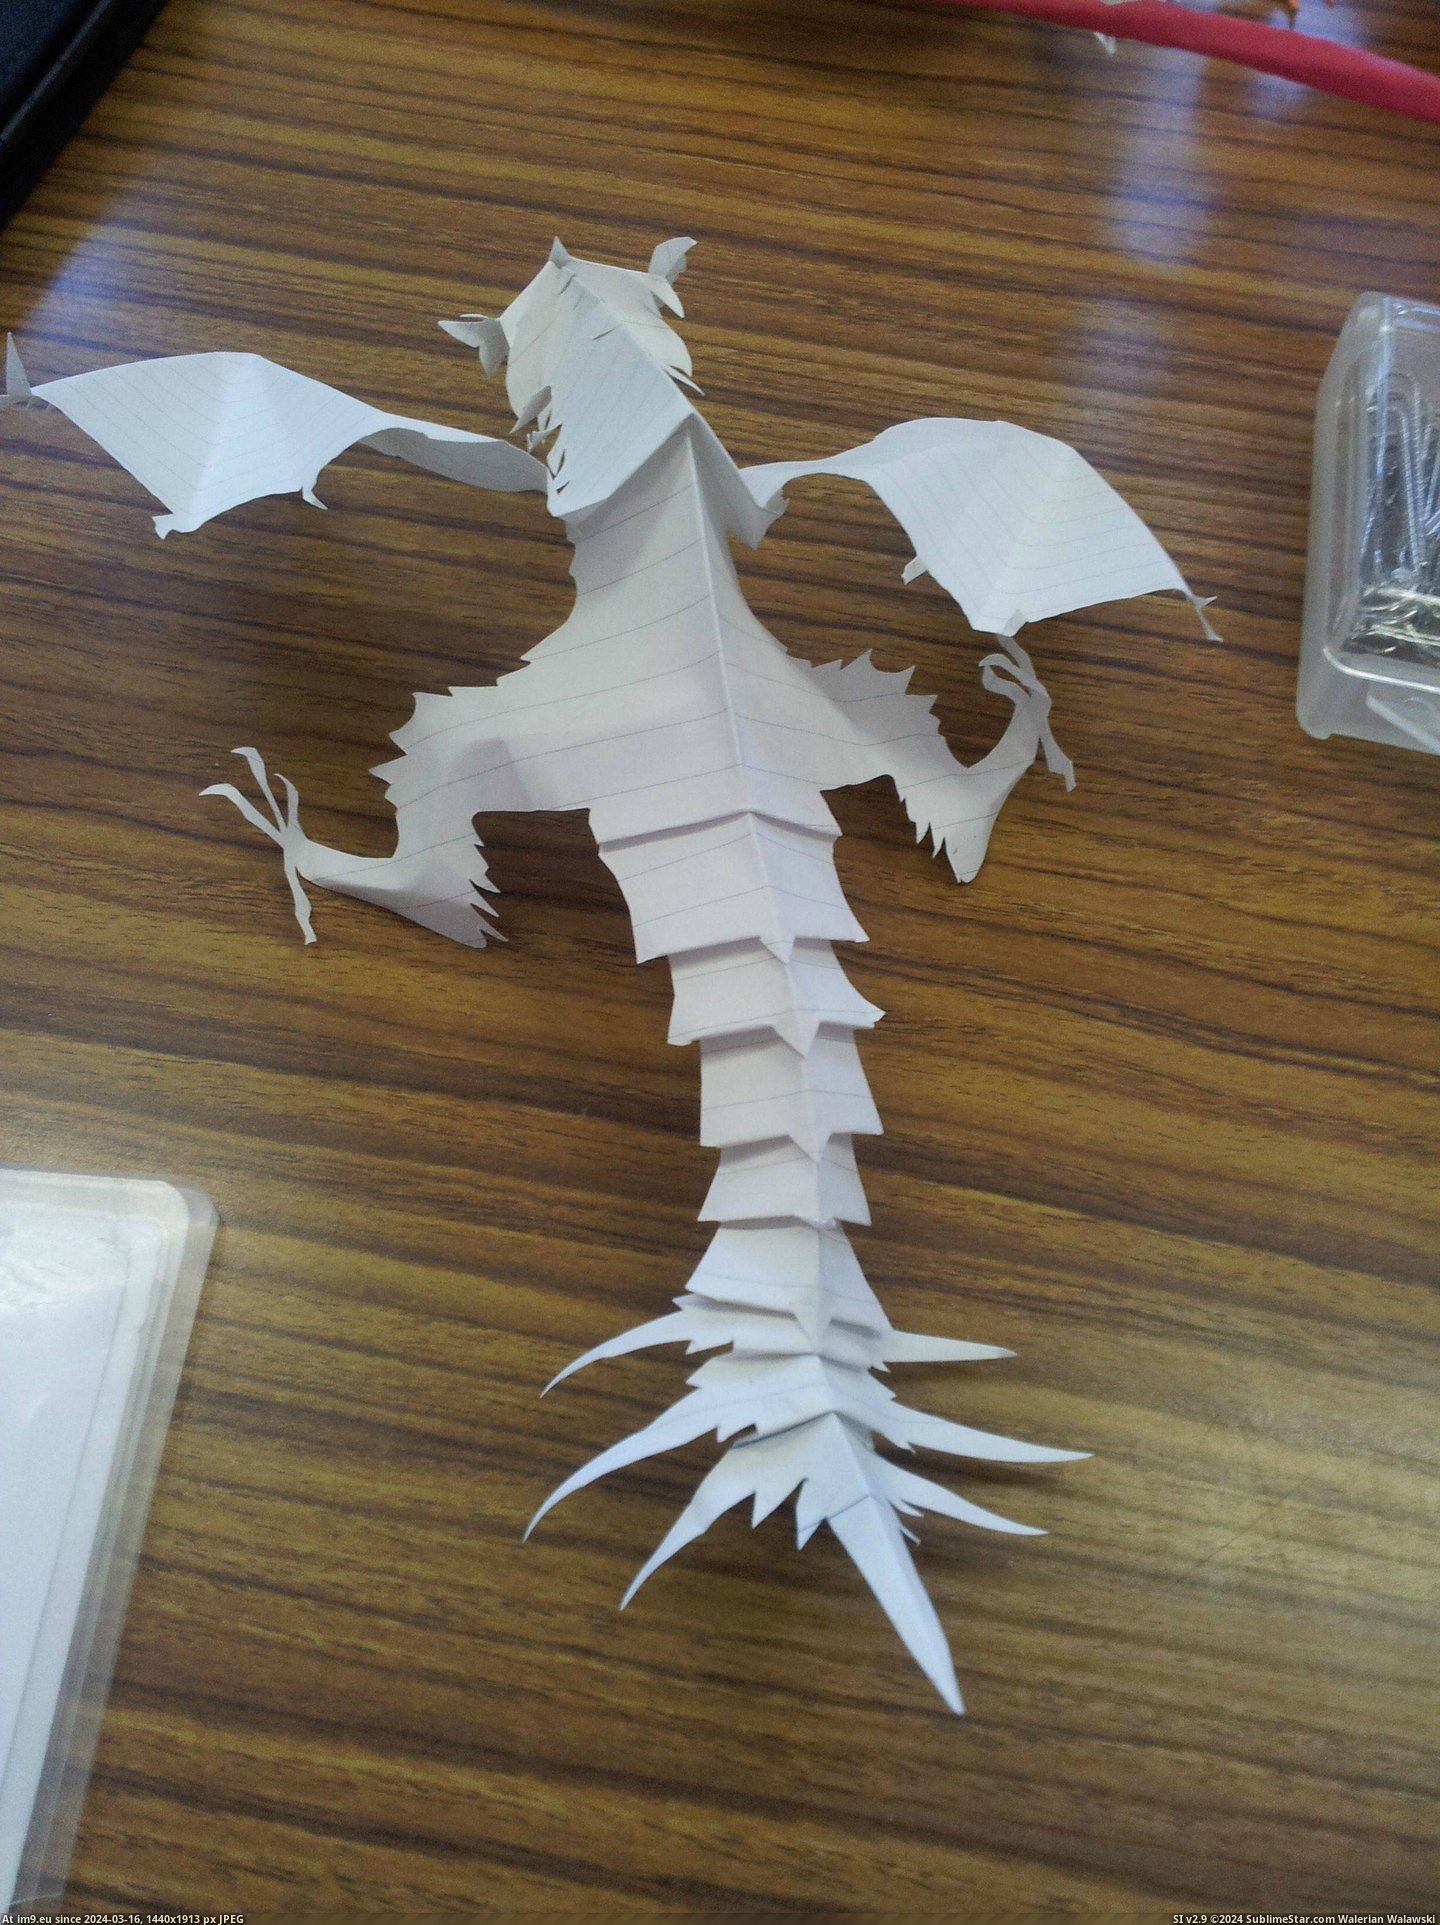 #One #Paper #Students #Creatures #Freehand #Bored #Completely [Pics] One of my students makes these creatures out of paper completely freehand whenever he is bored 2 Pic. (Bild von album My r/PICS favs))